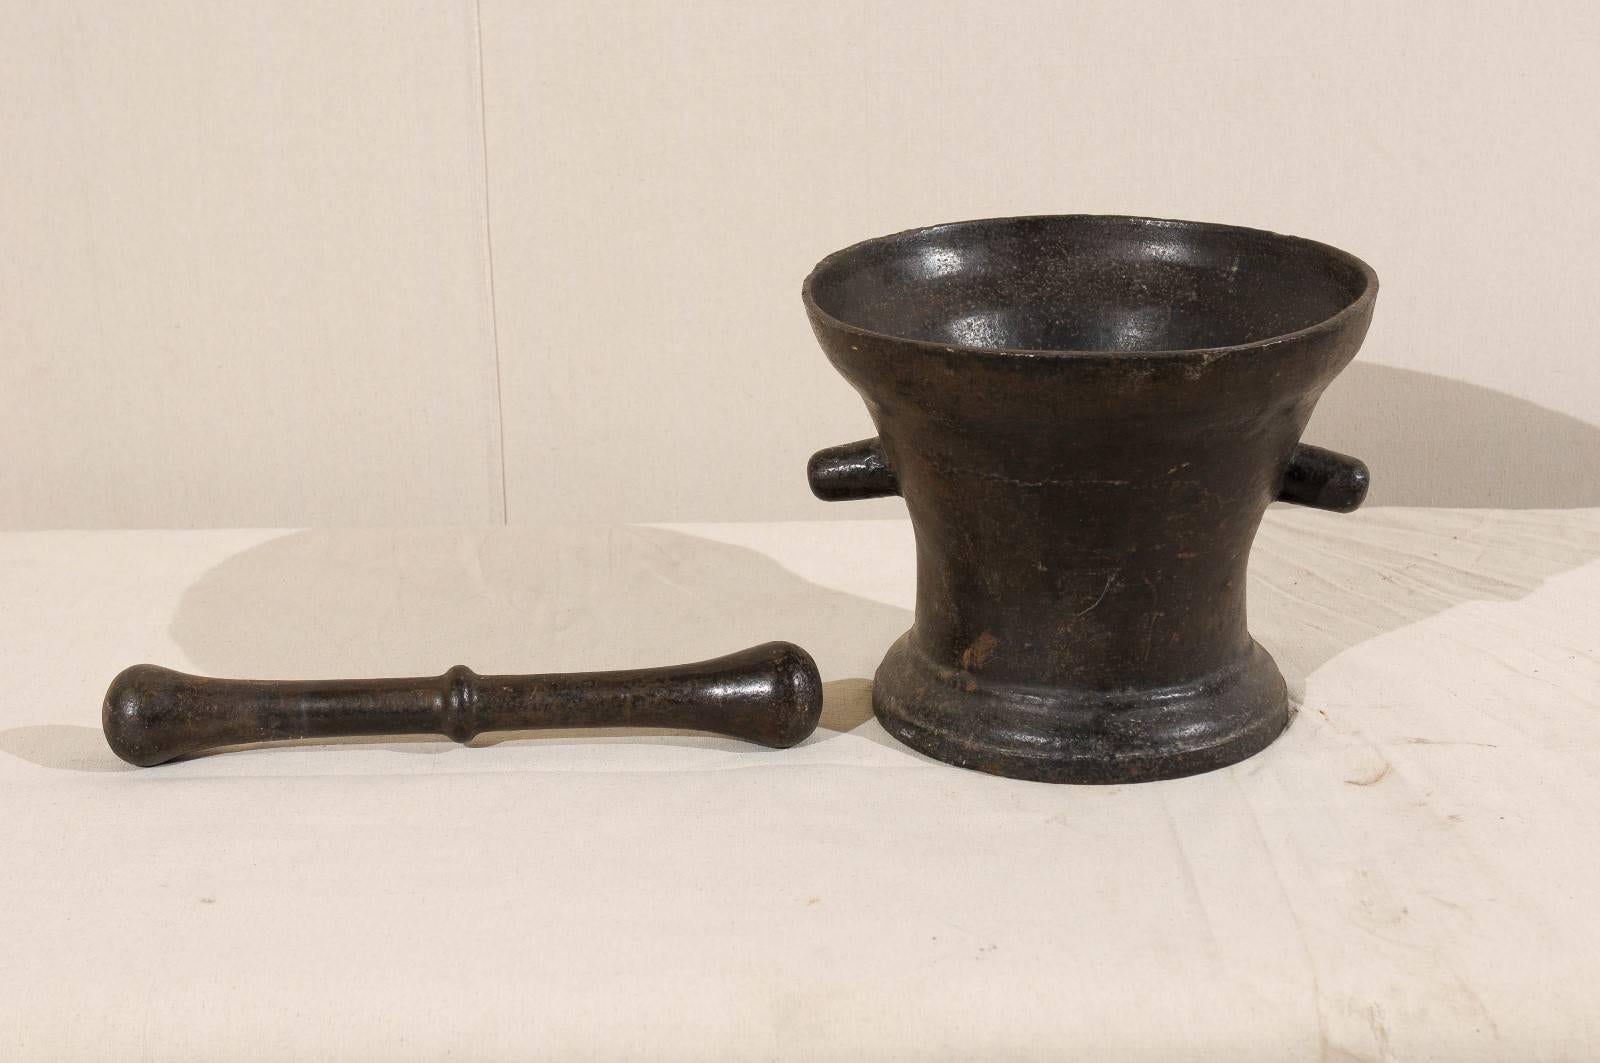 Patinated Italian, 18th Century Iron Mortar and Pestle, Two Handles and Nice Patina